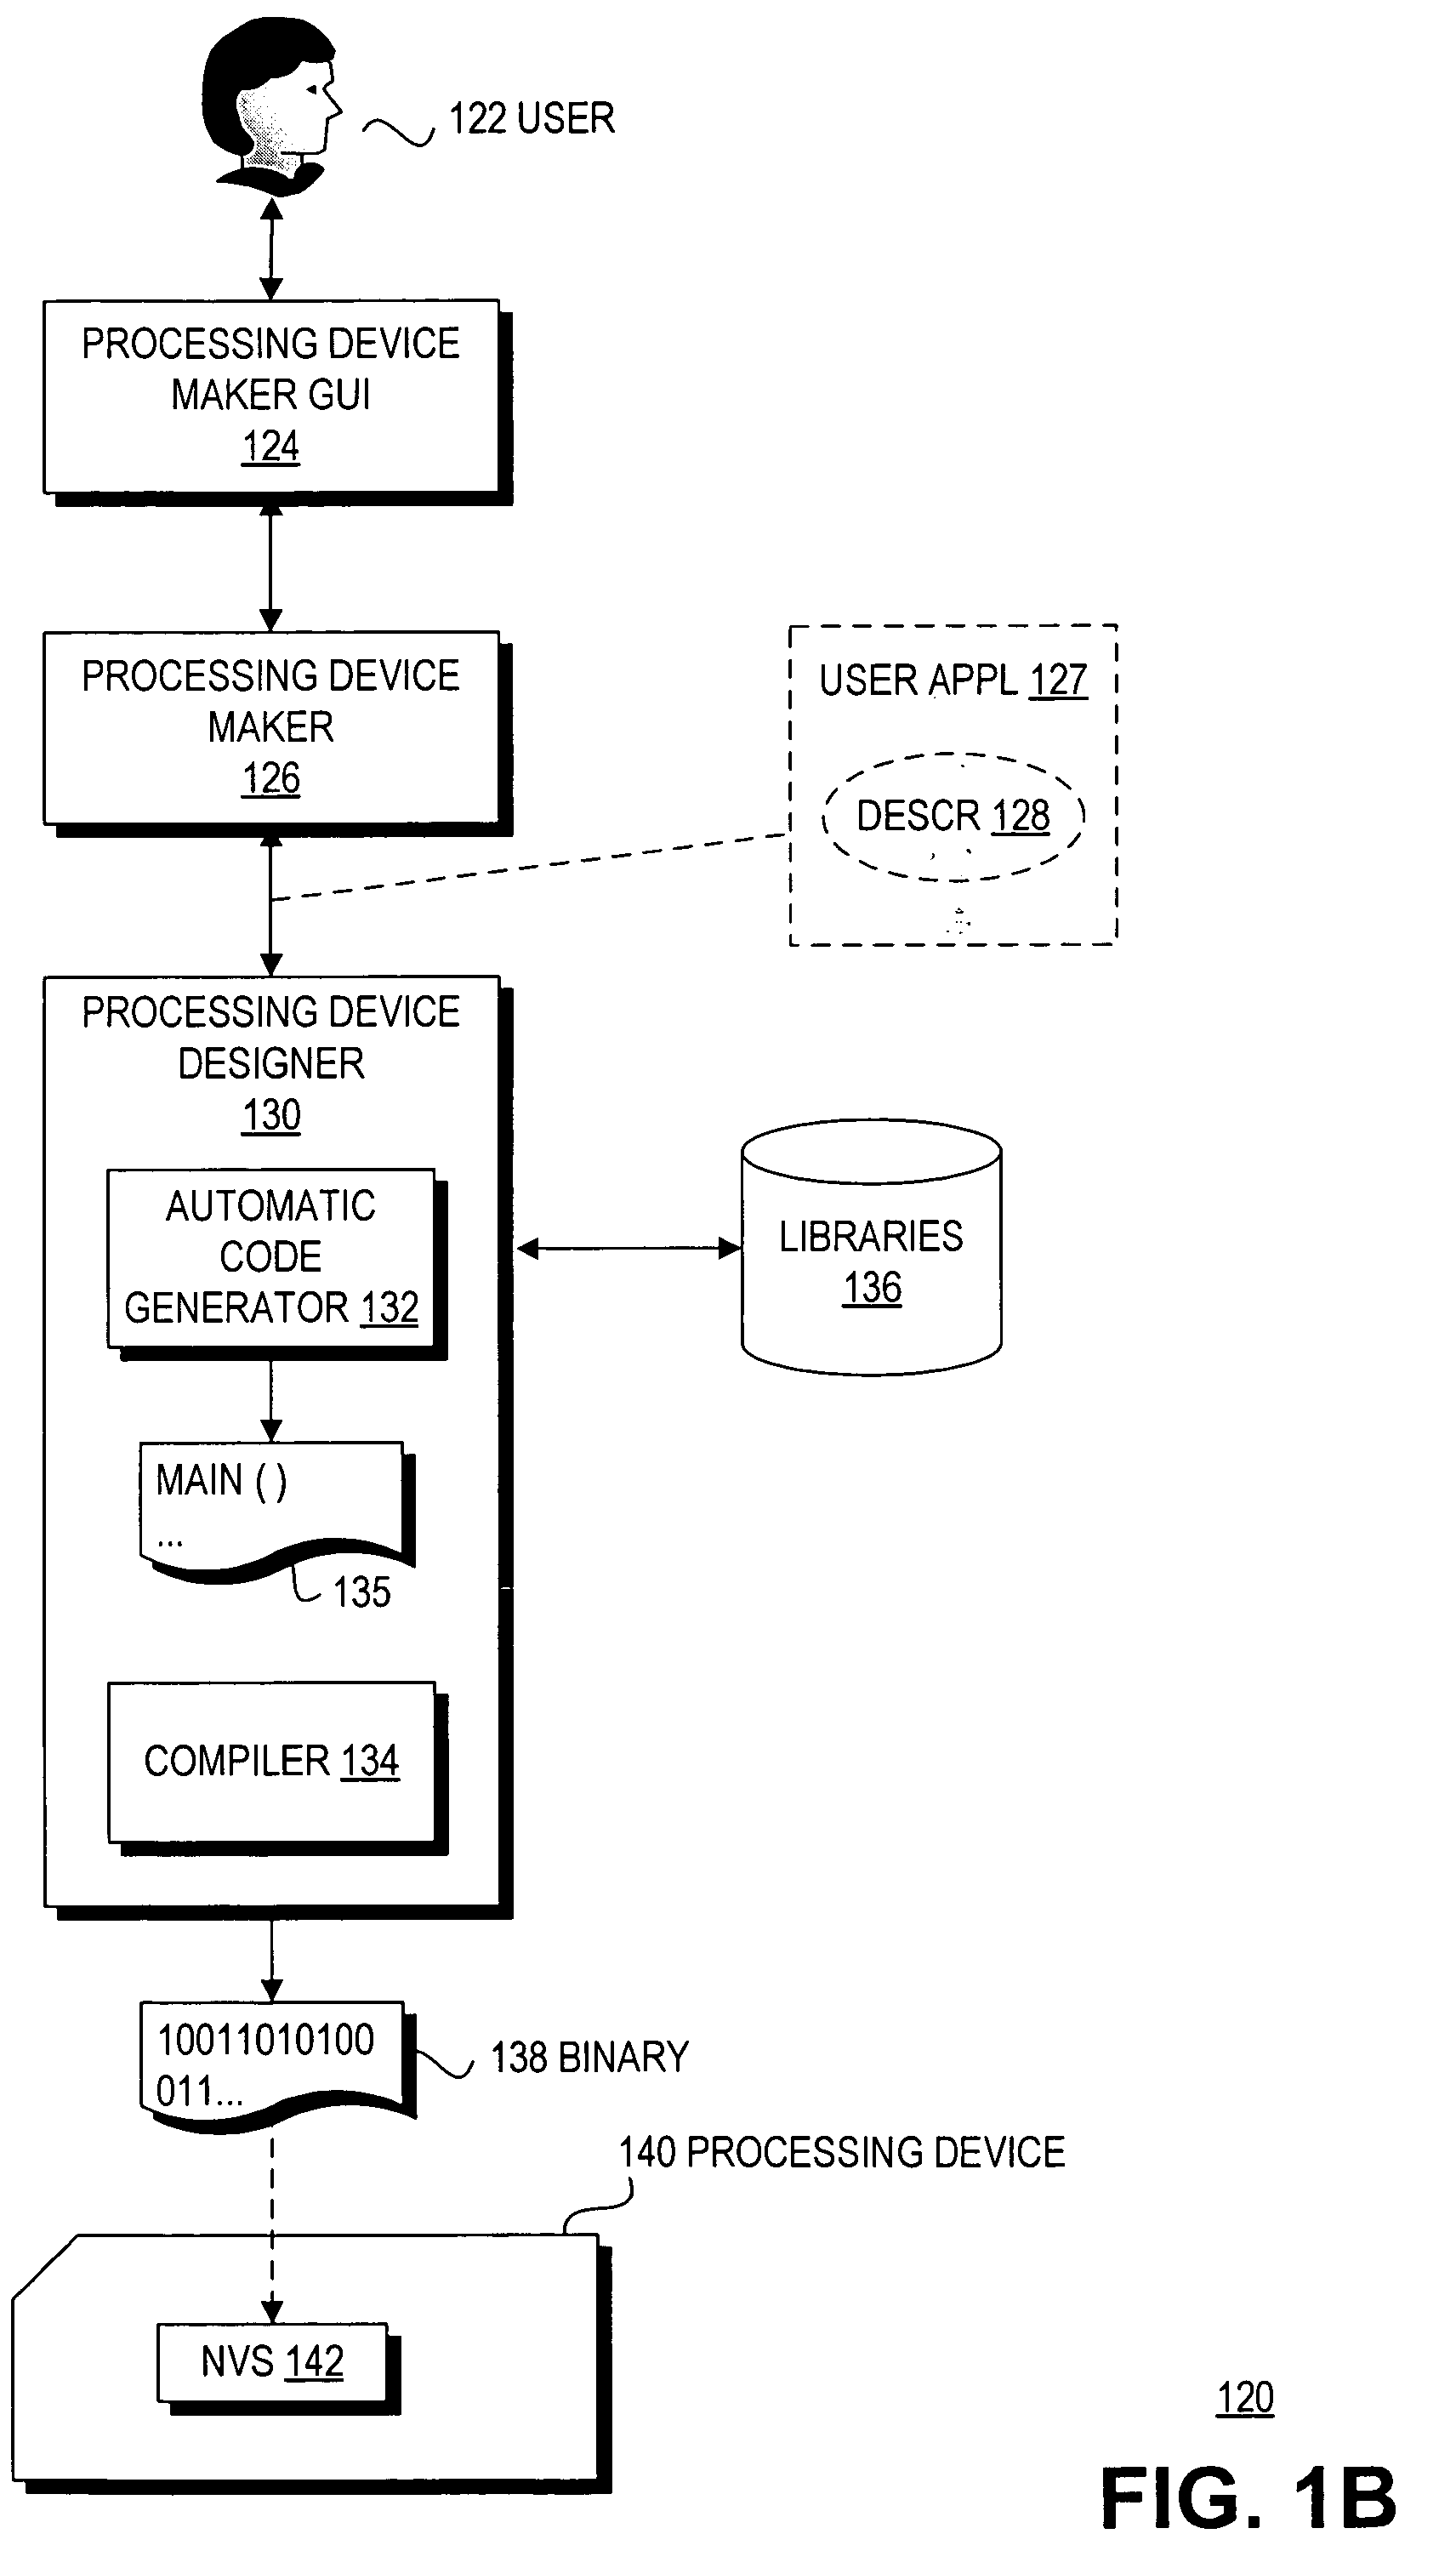 Providing hardware independence to automate code generation of processing device firmware